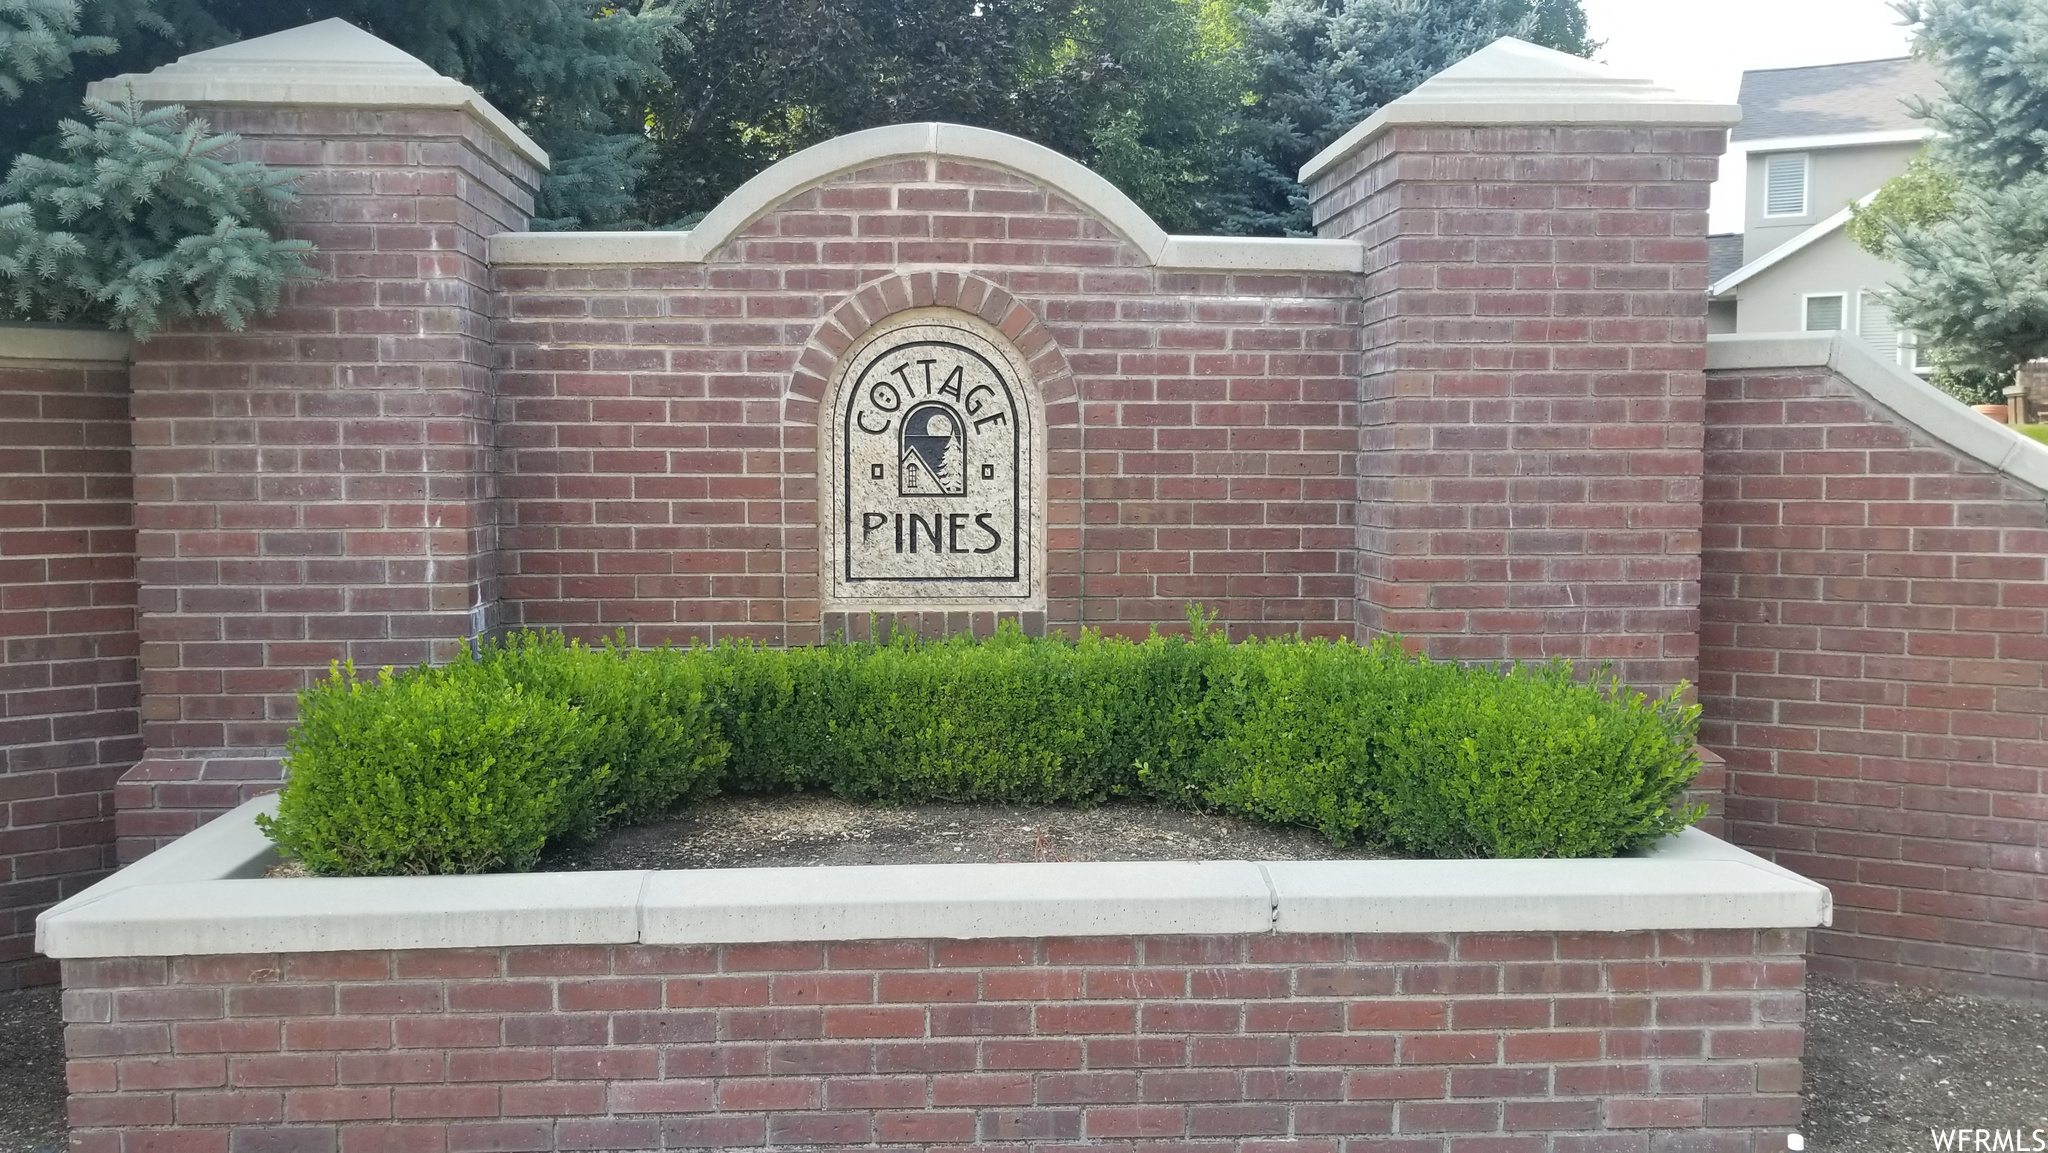 Brick planter boxes are on each side of the gate.